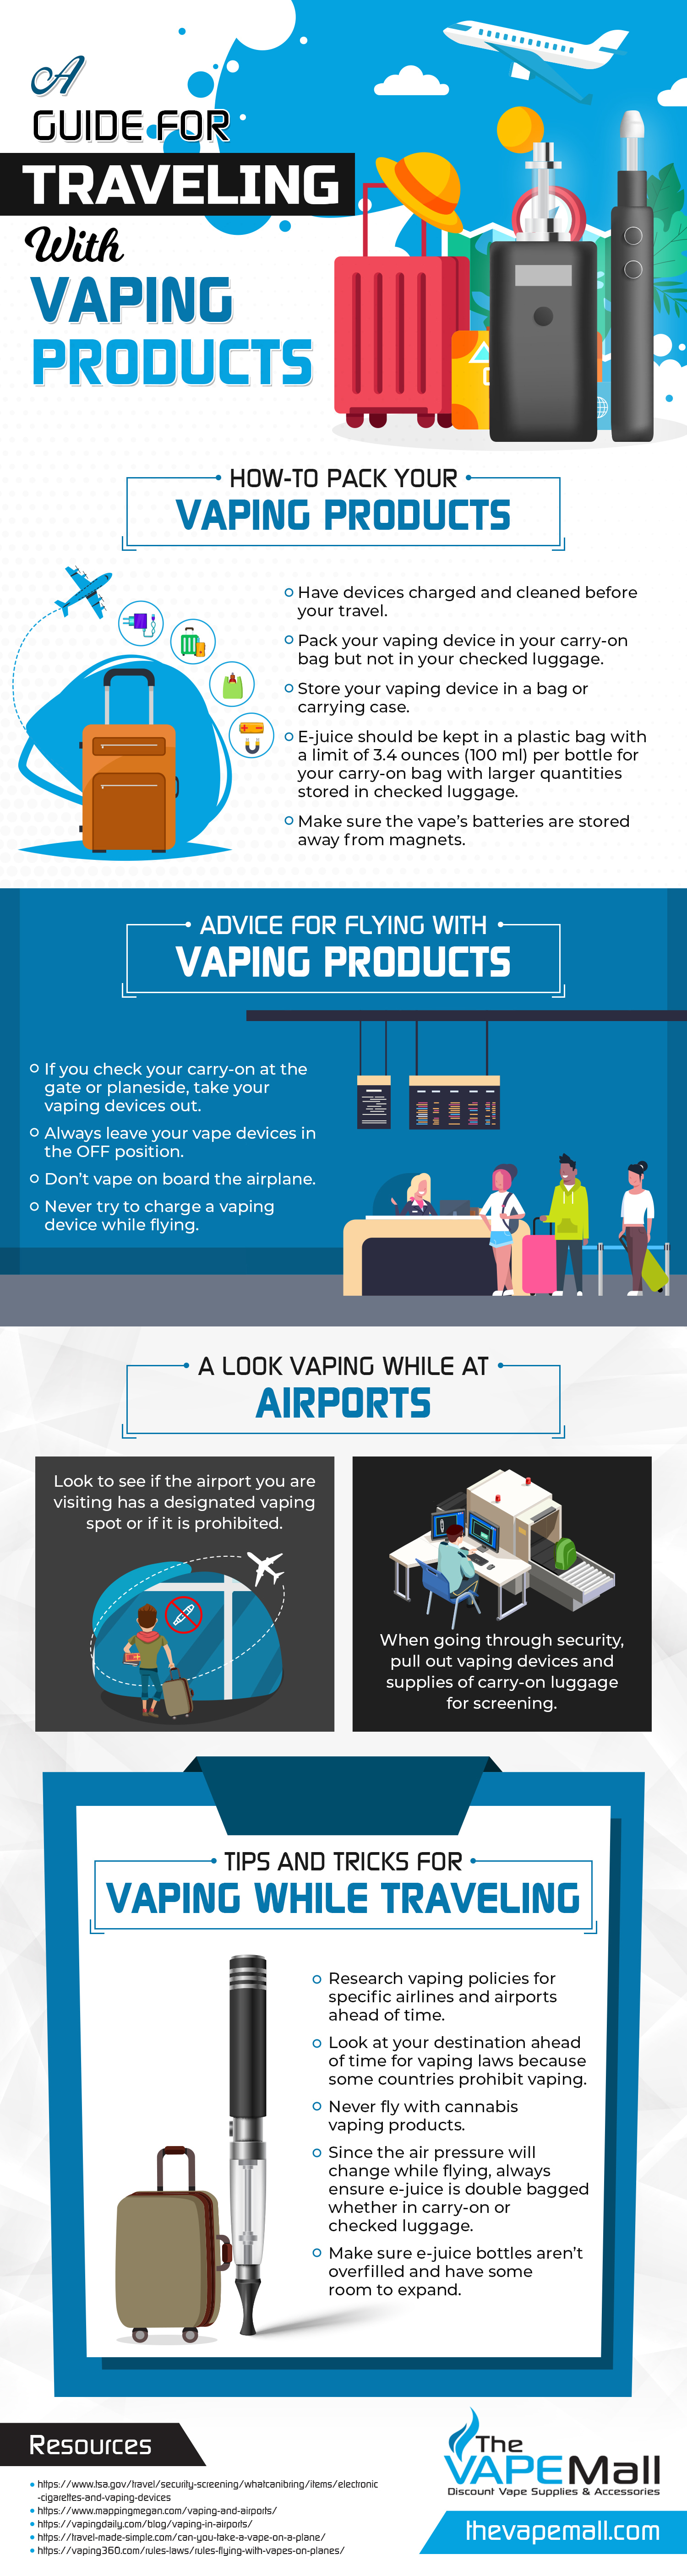 a-guide-for-traveling-with-vaping-products.jpg